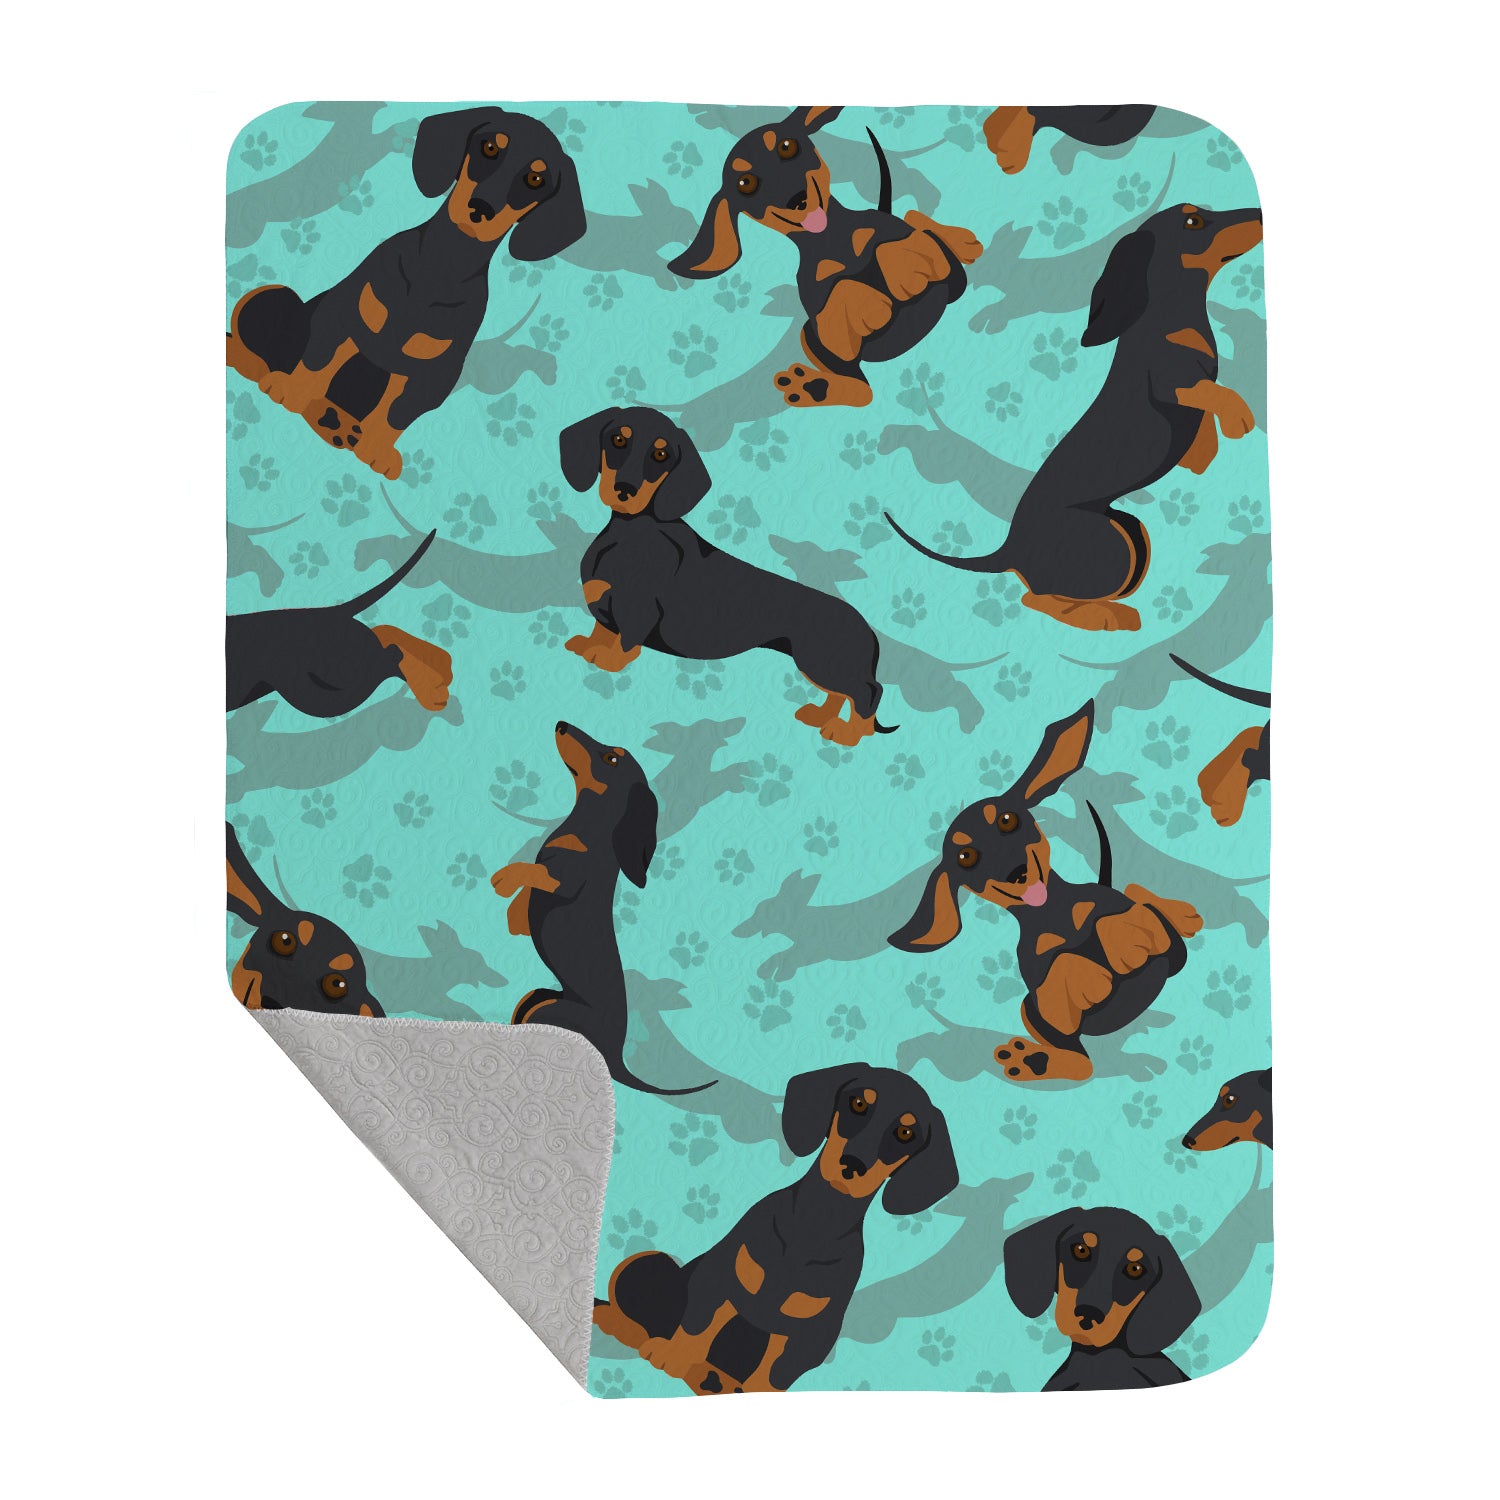 Buy this Black and Tan Dachshund Quilted Blanket 50x60